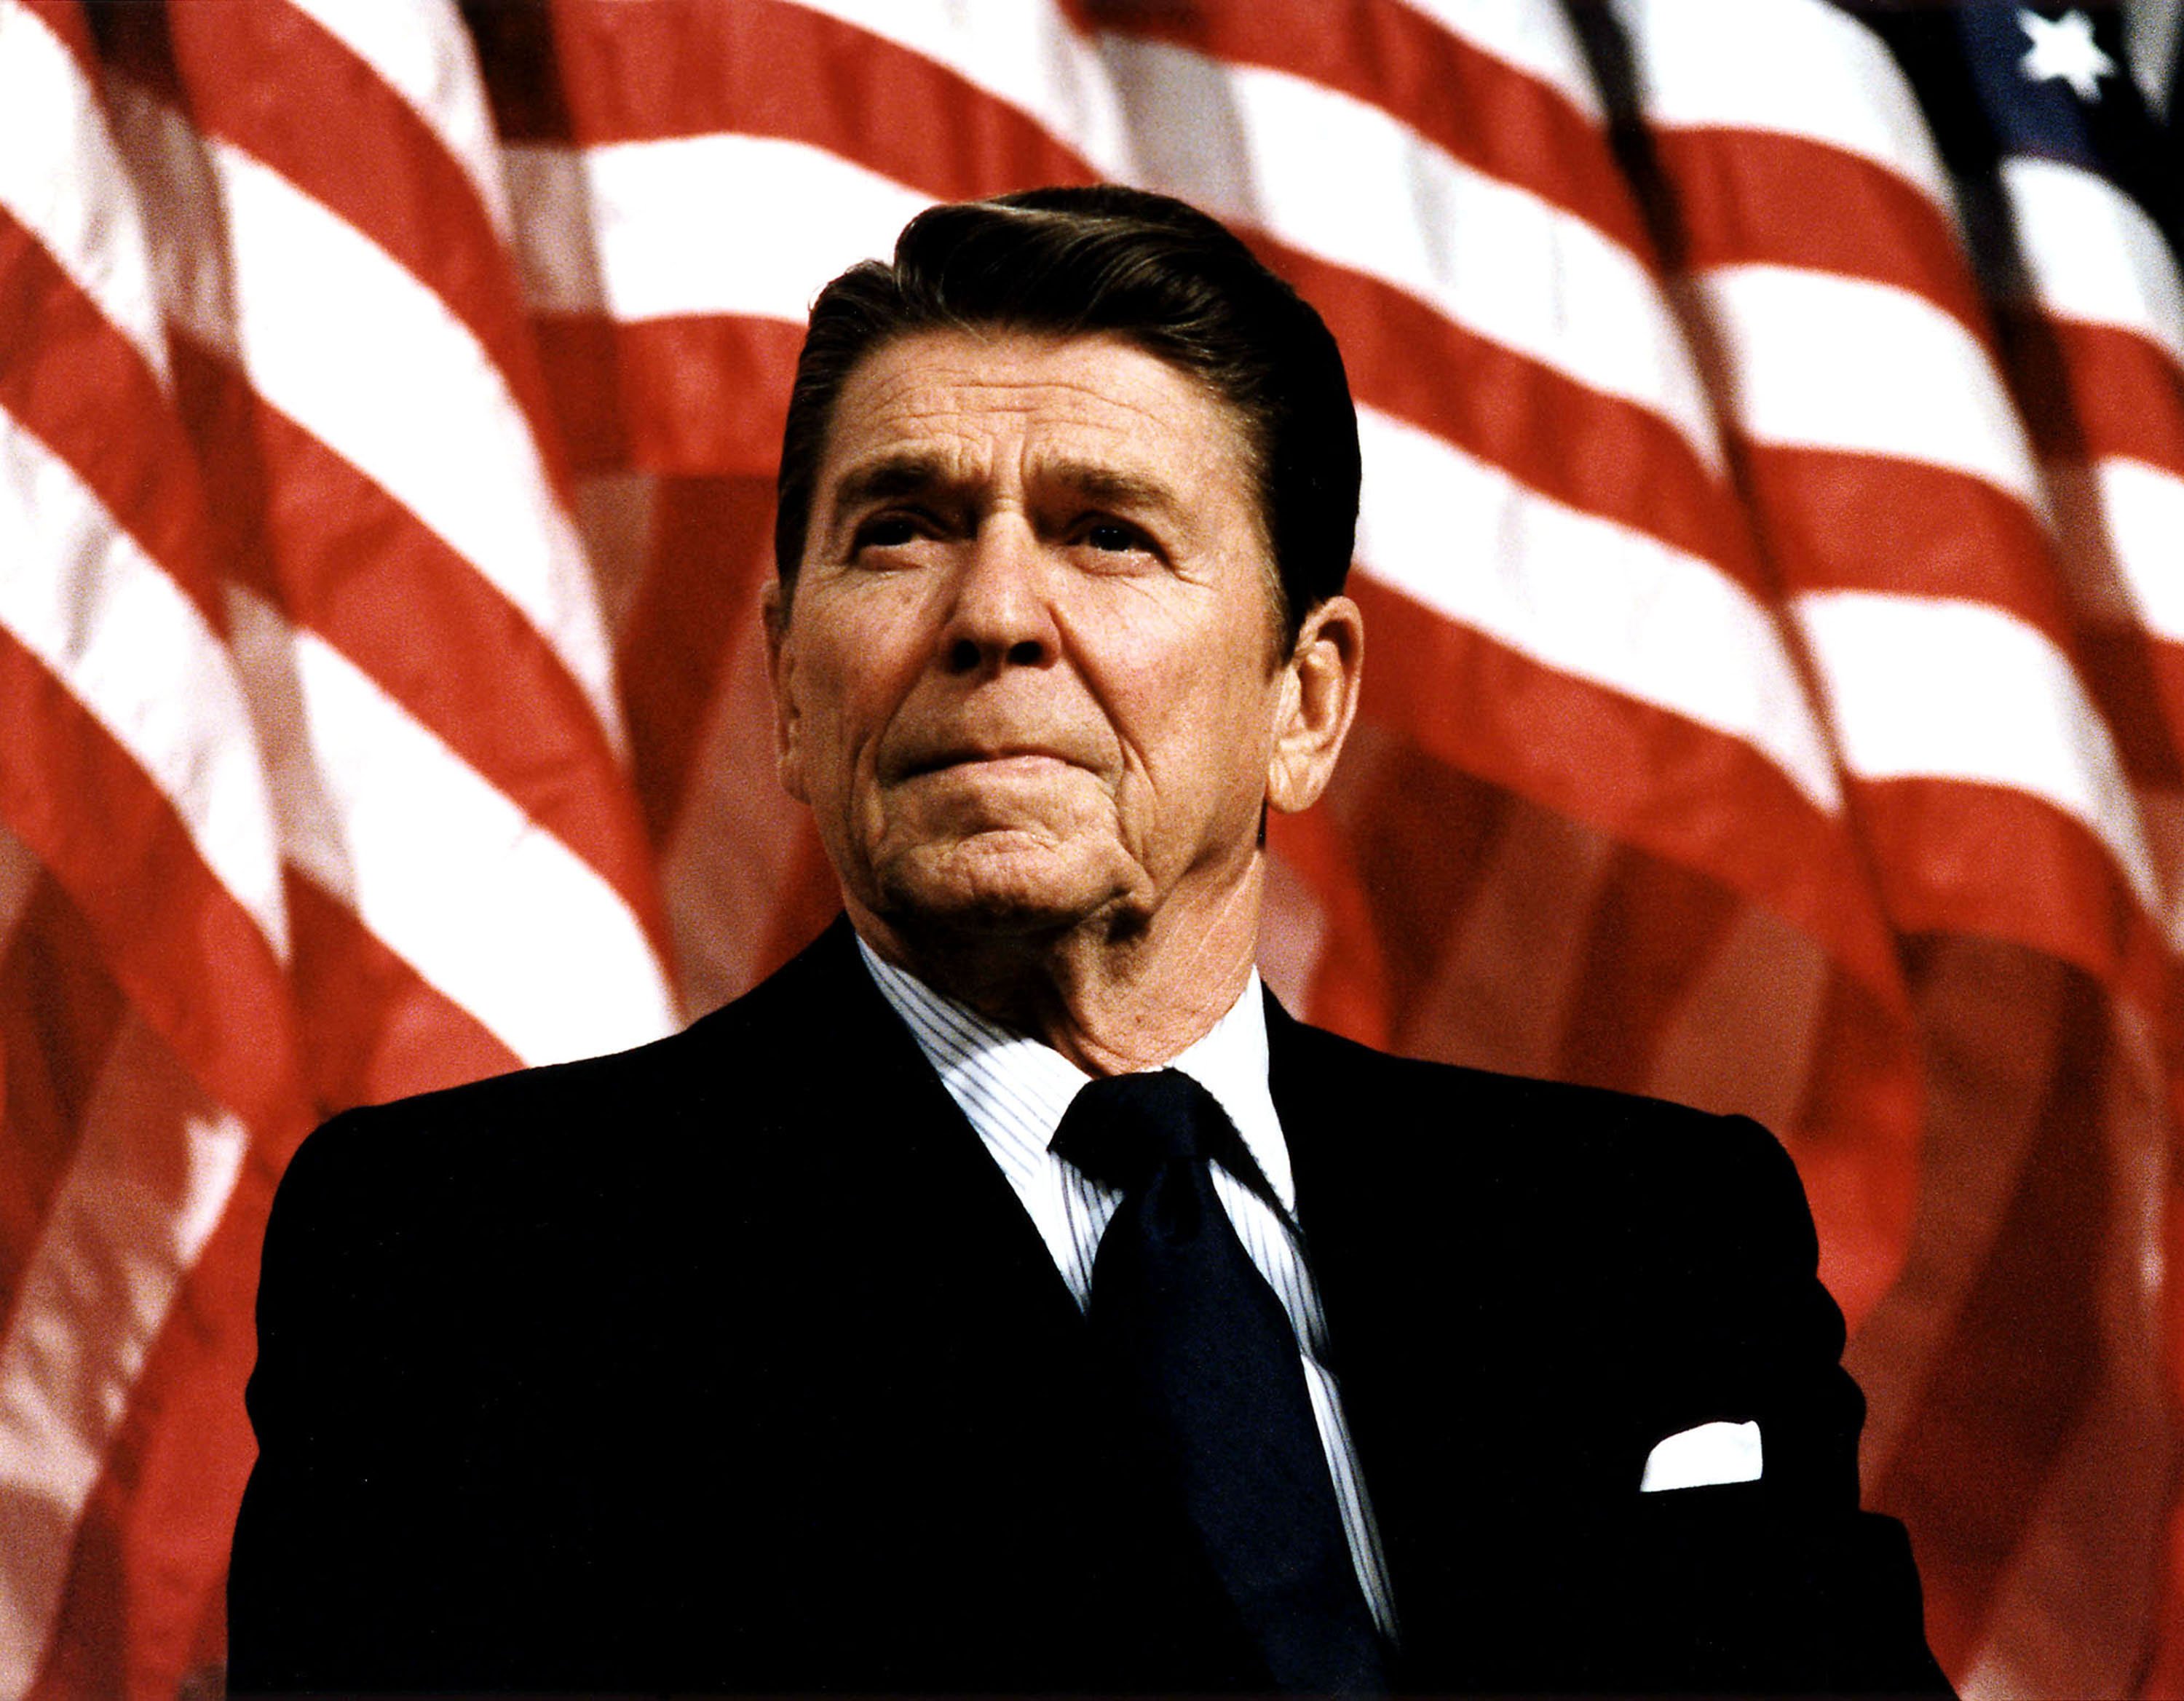 Ronald Reagan | Getty Images